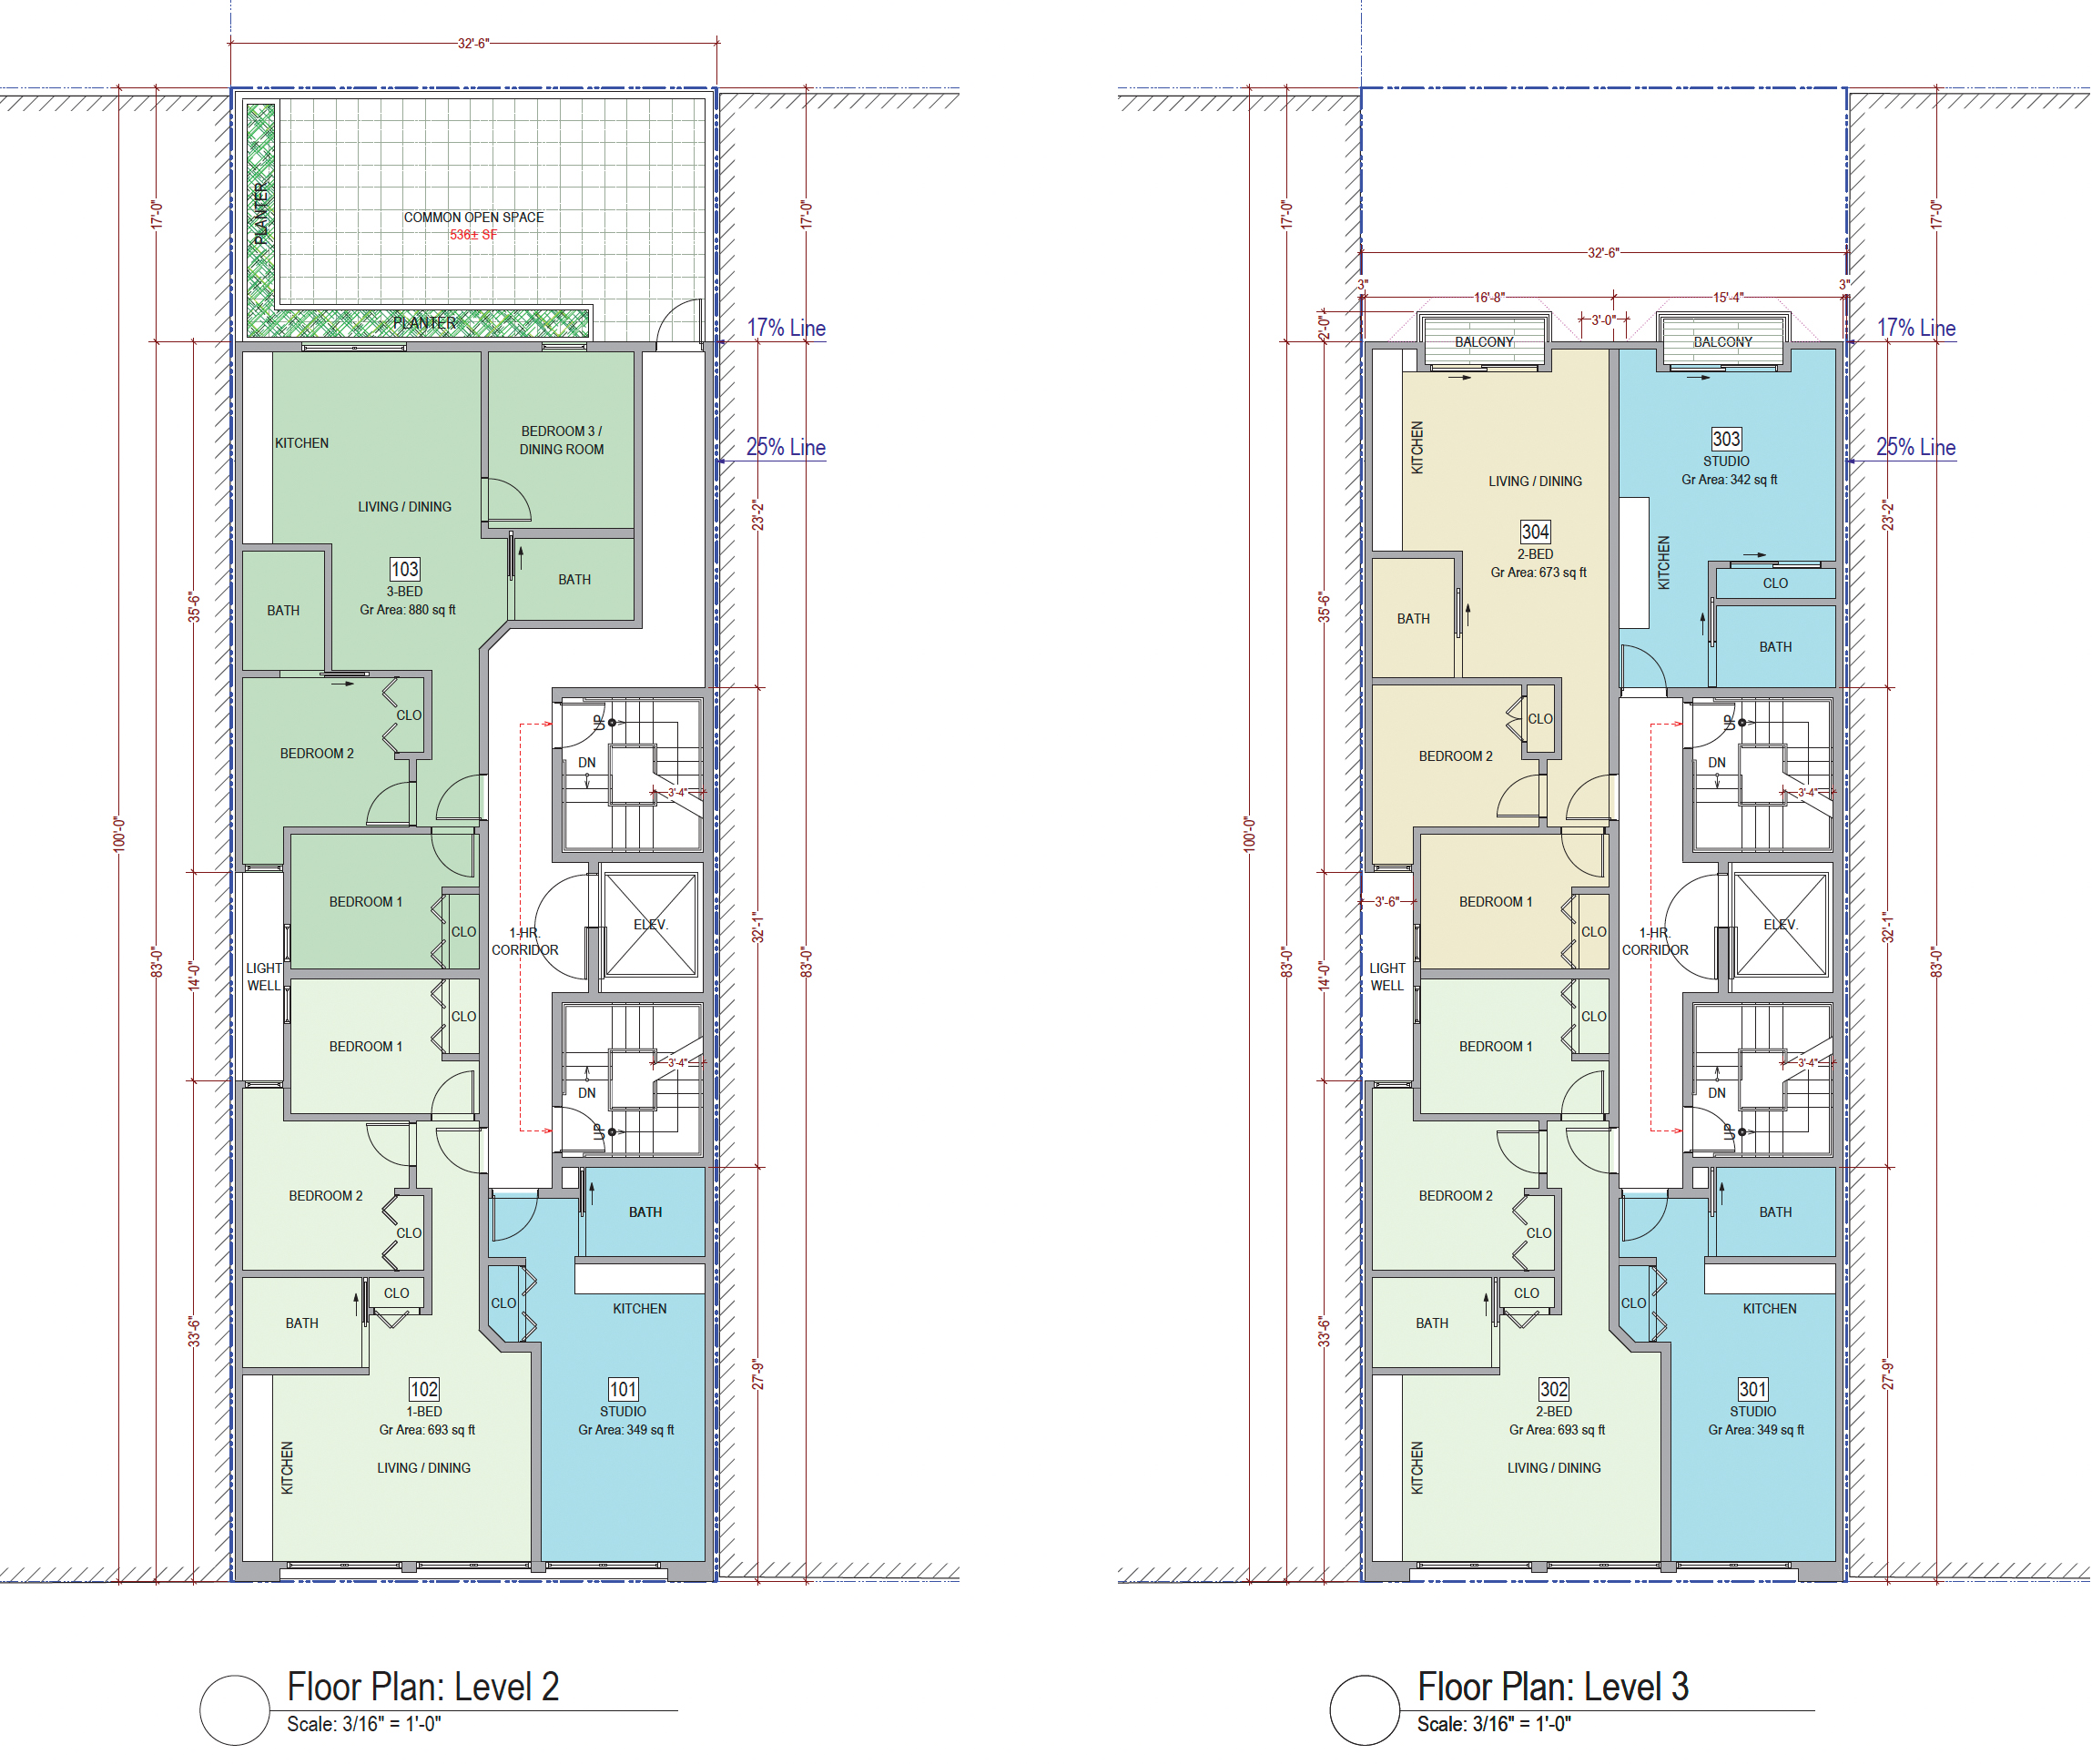 244 9th Street floor plans of levels two and three, rendering by SIA Consulting